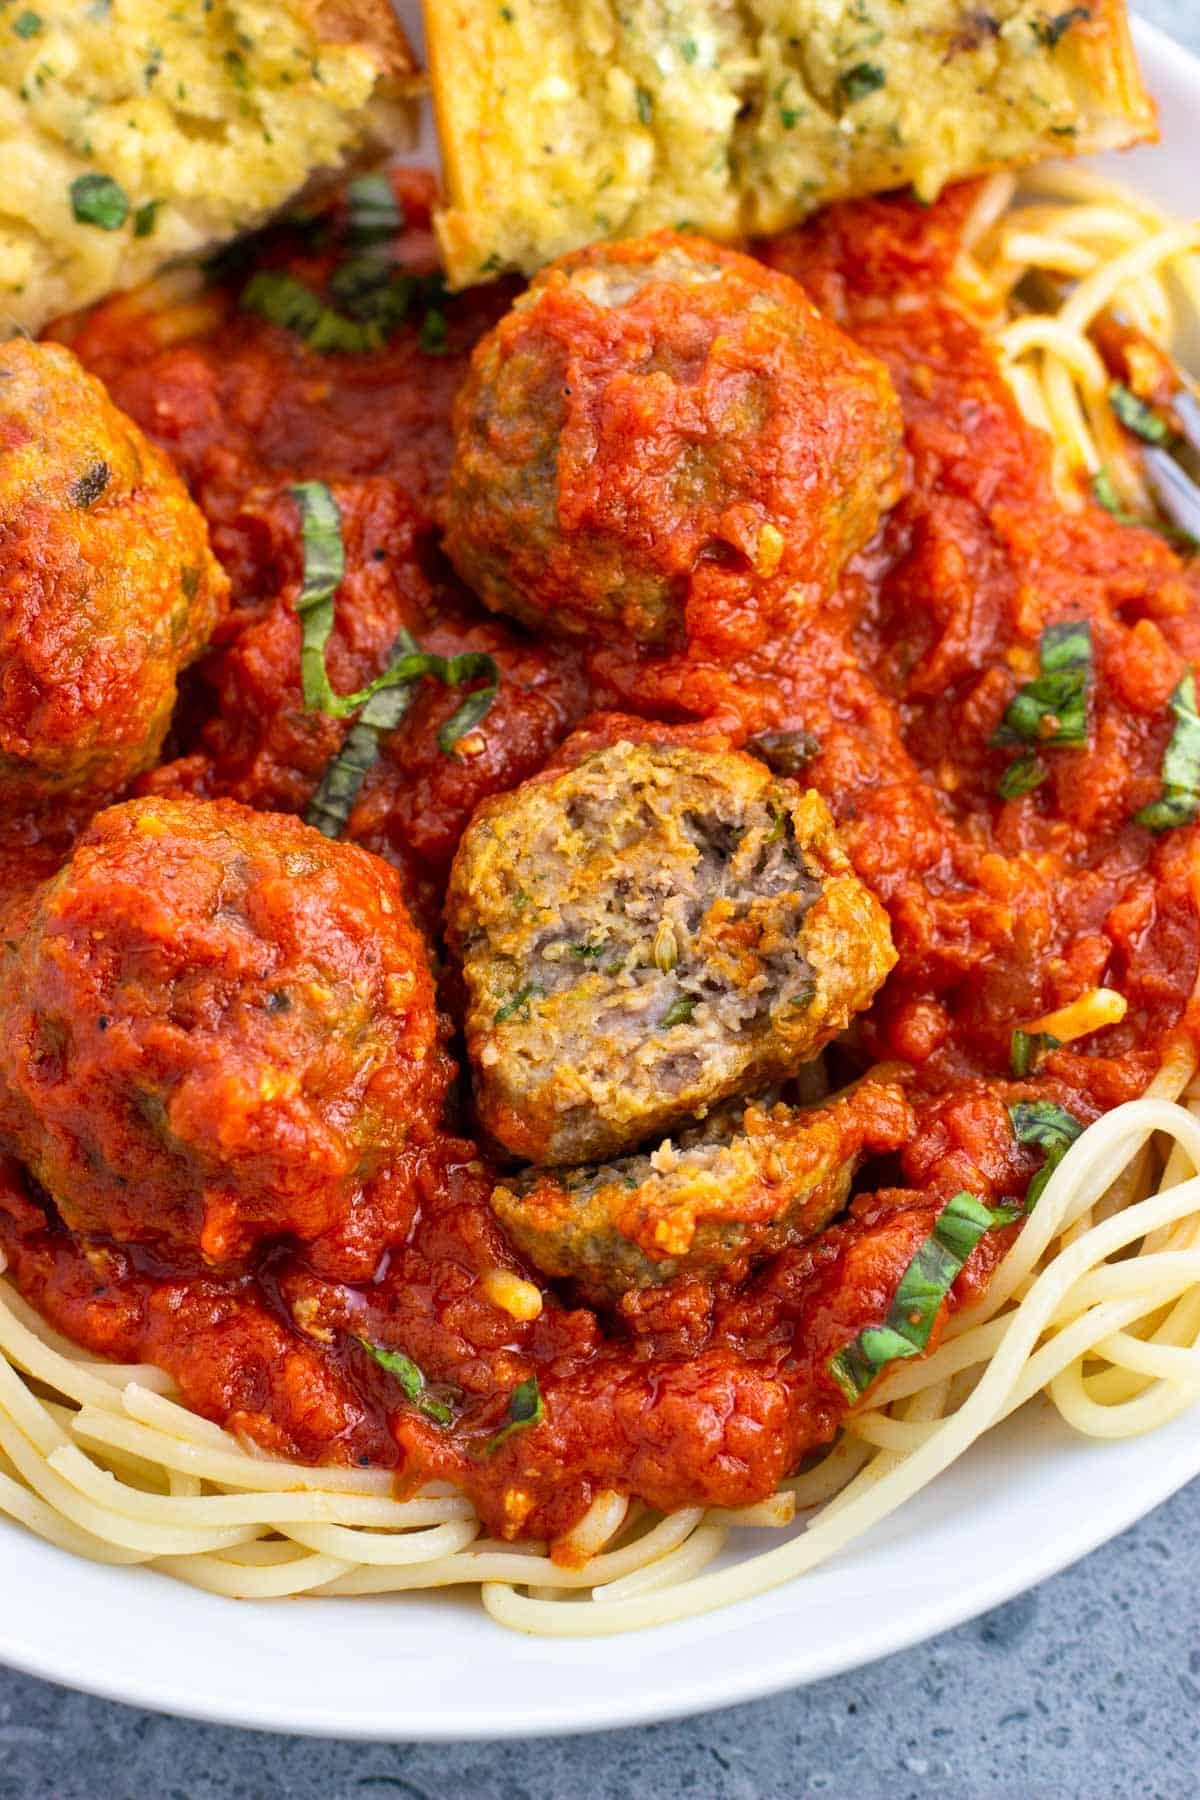 A bowl of spaghetti and meatballs with one meatball cut in half.